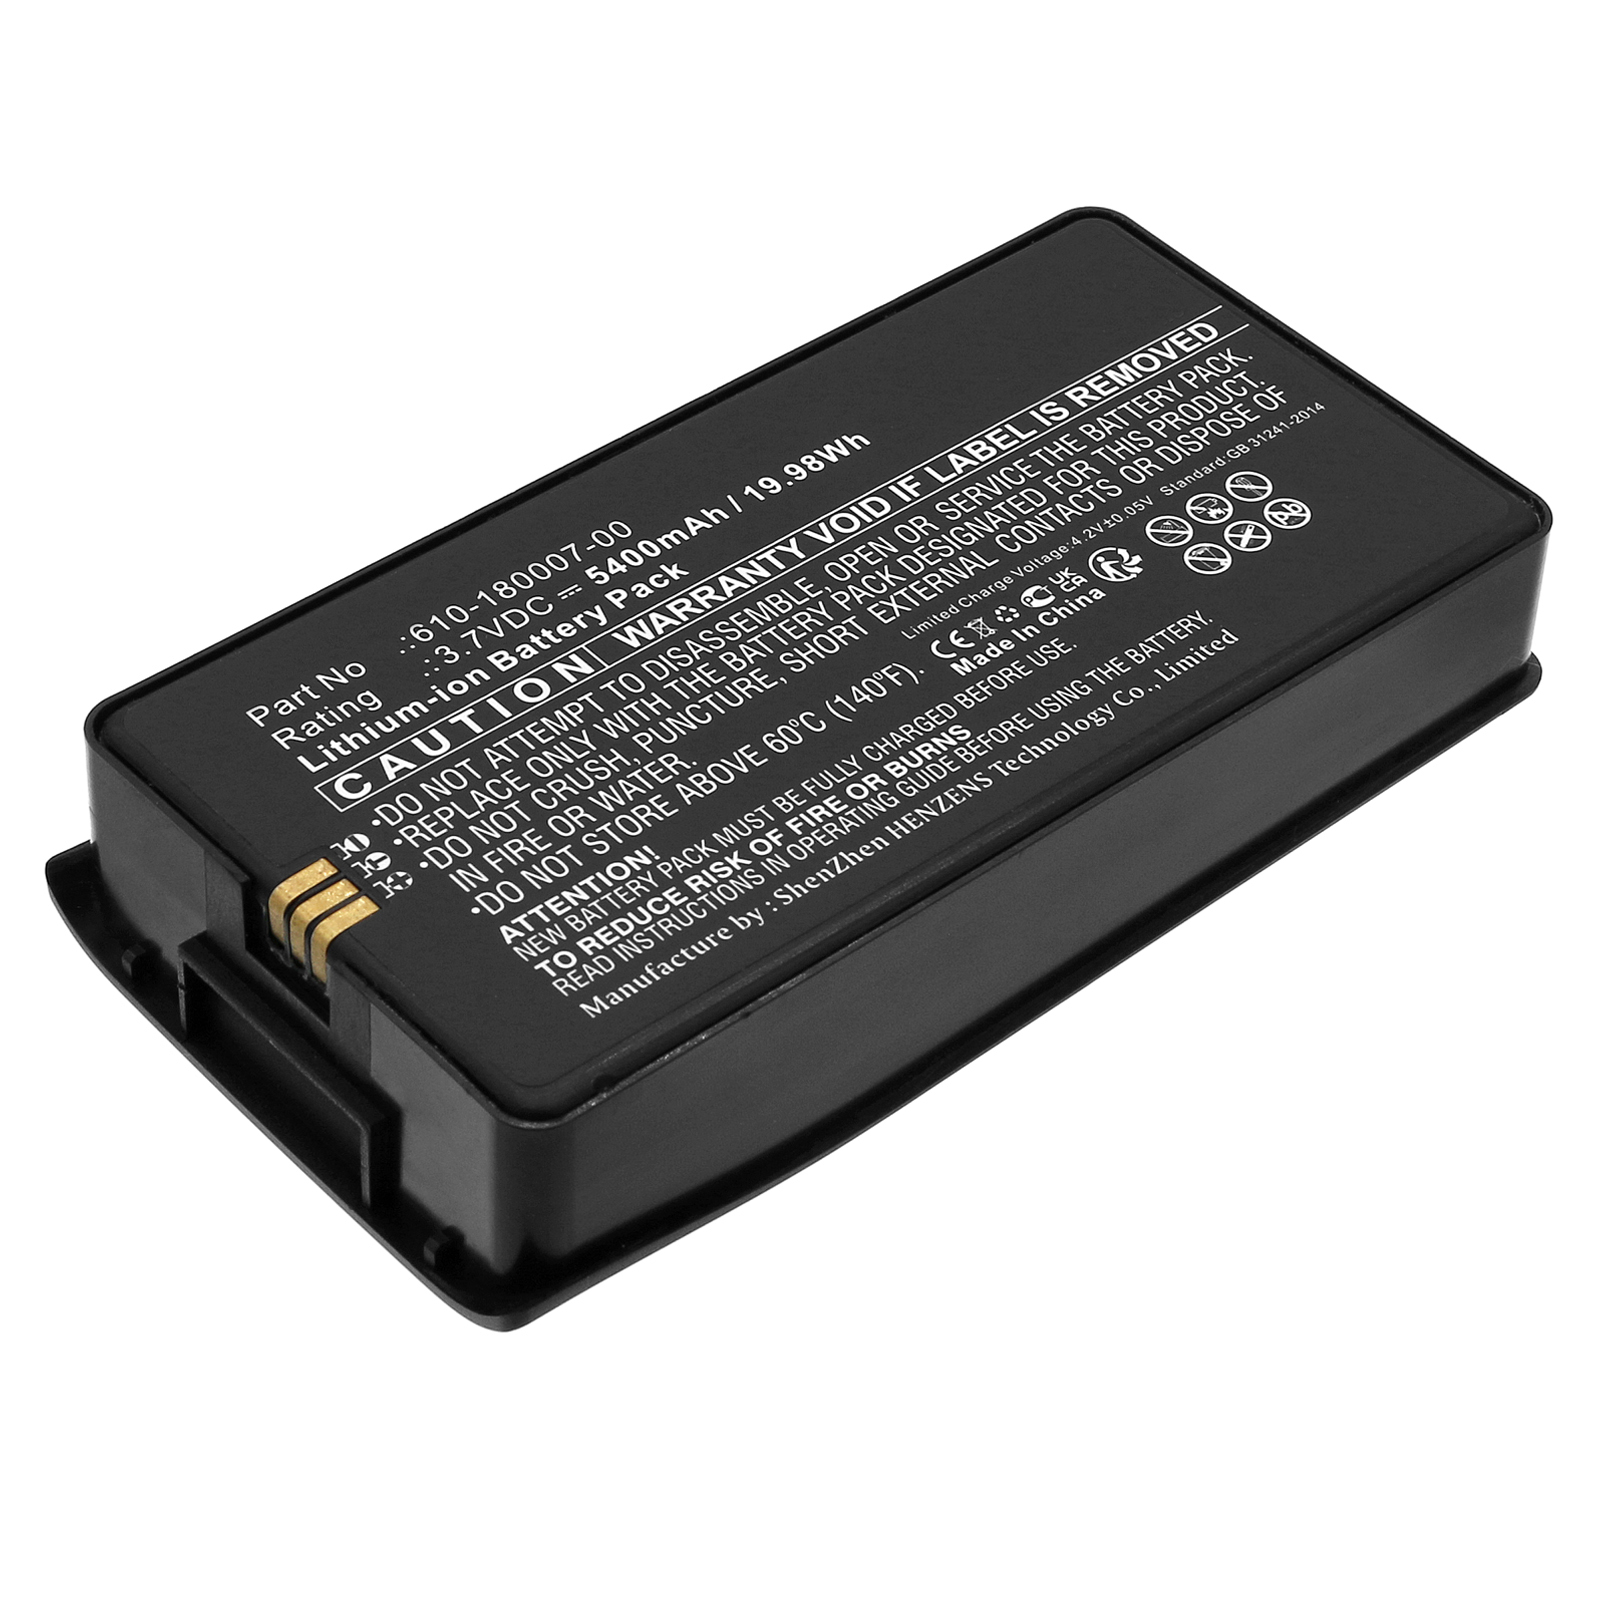 Batteries for RGISBarcode Scanner